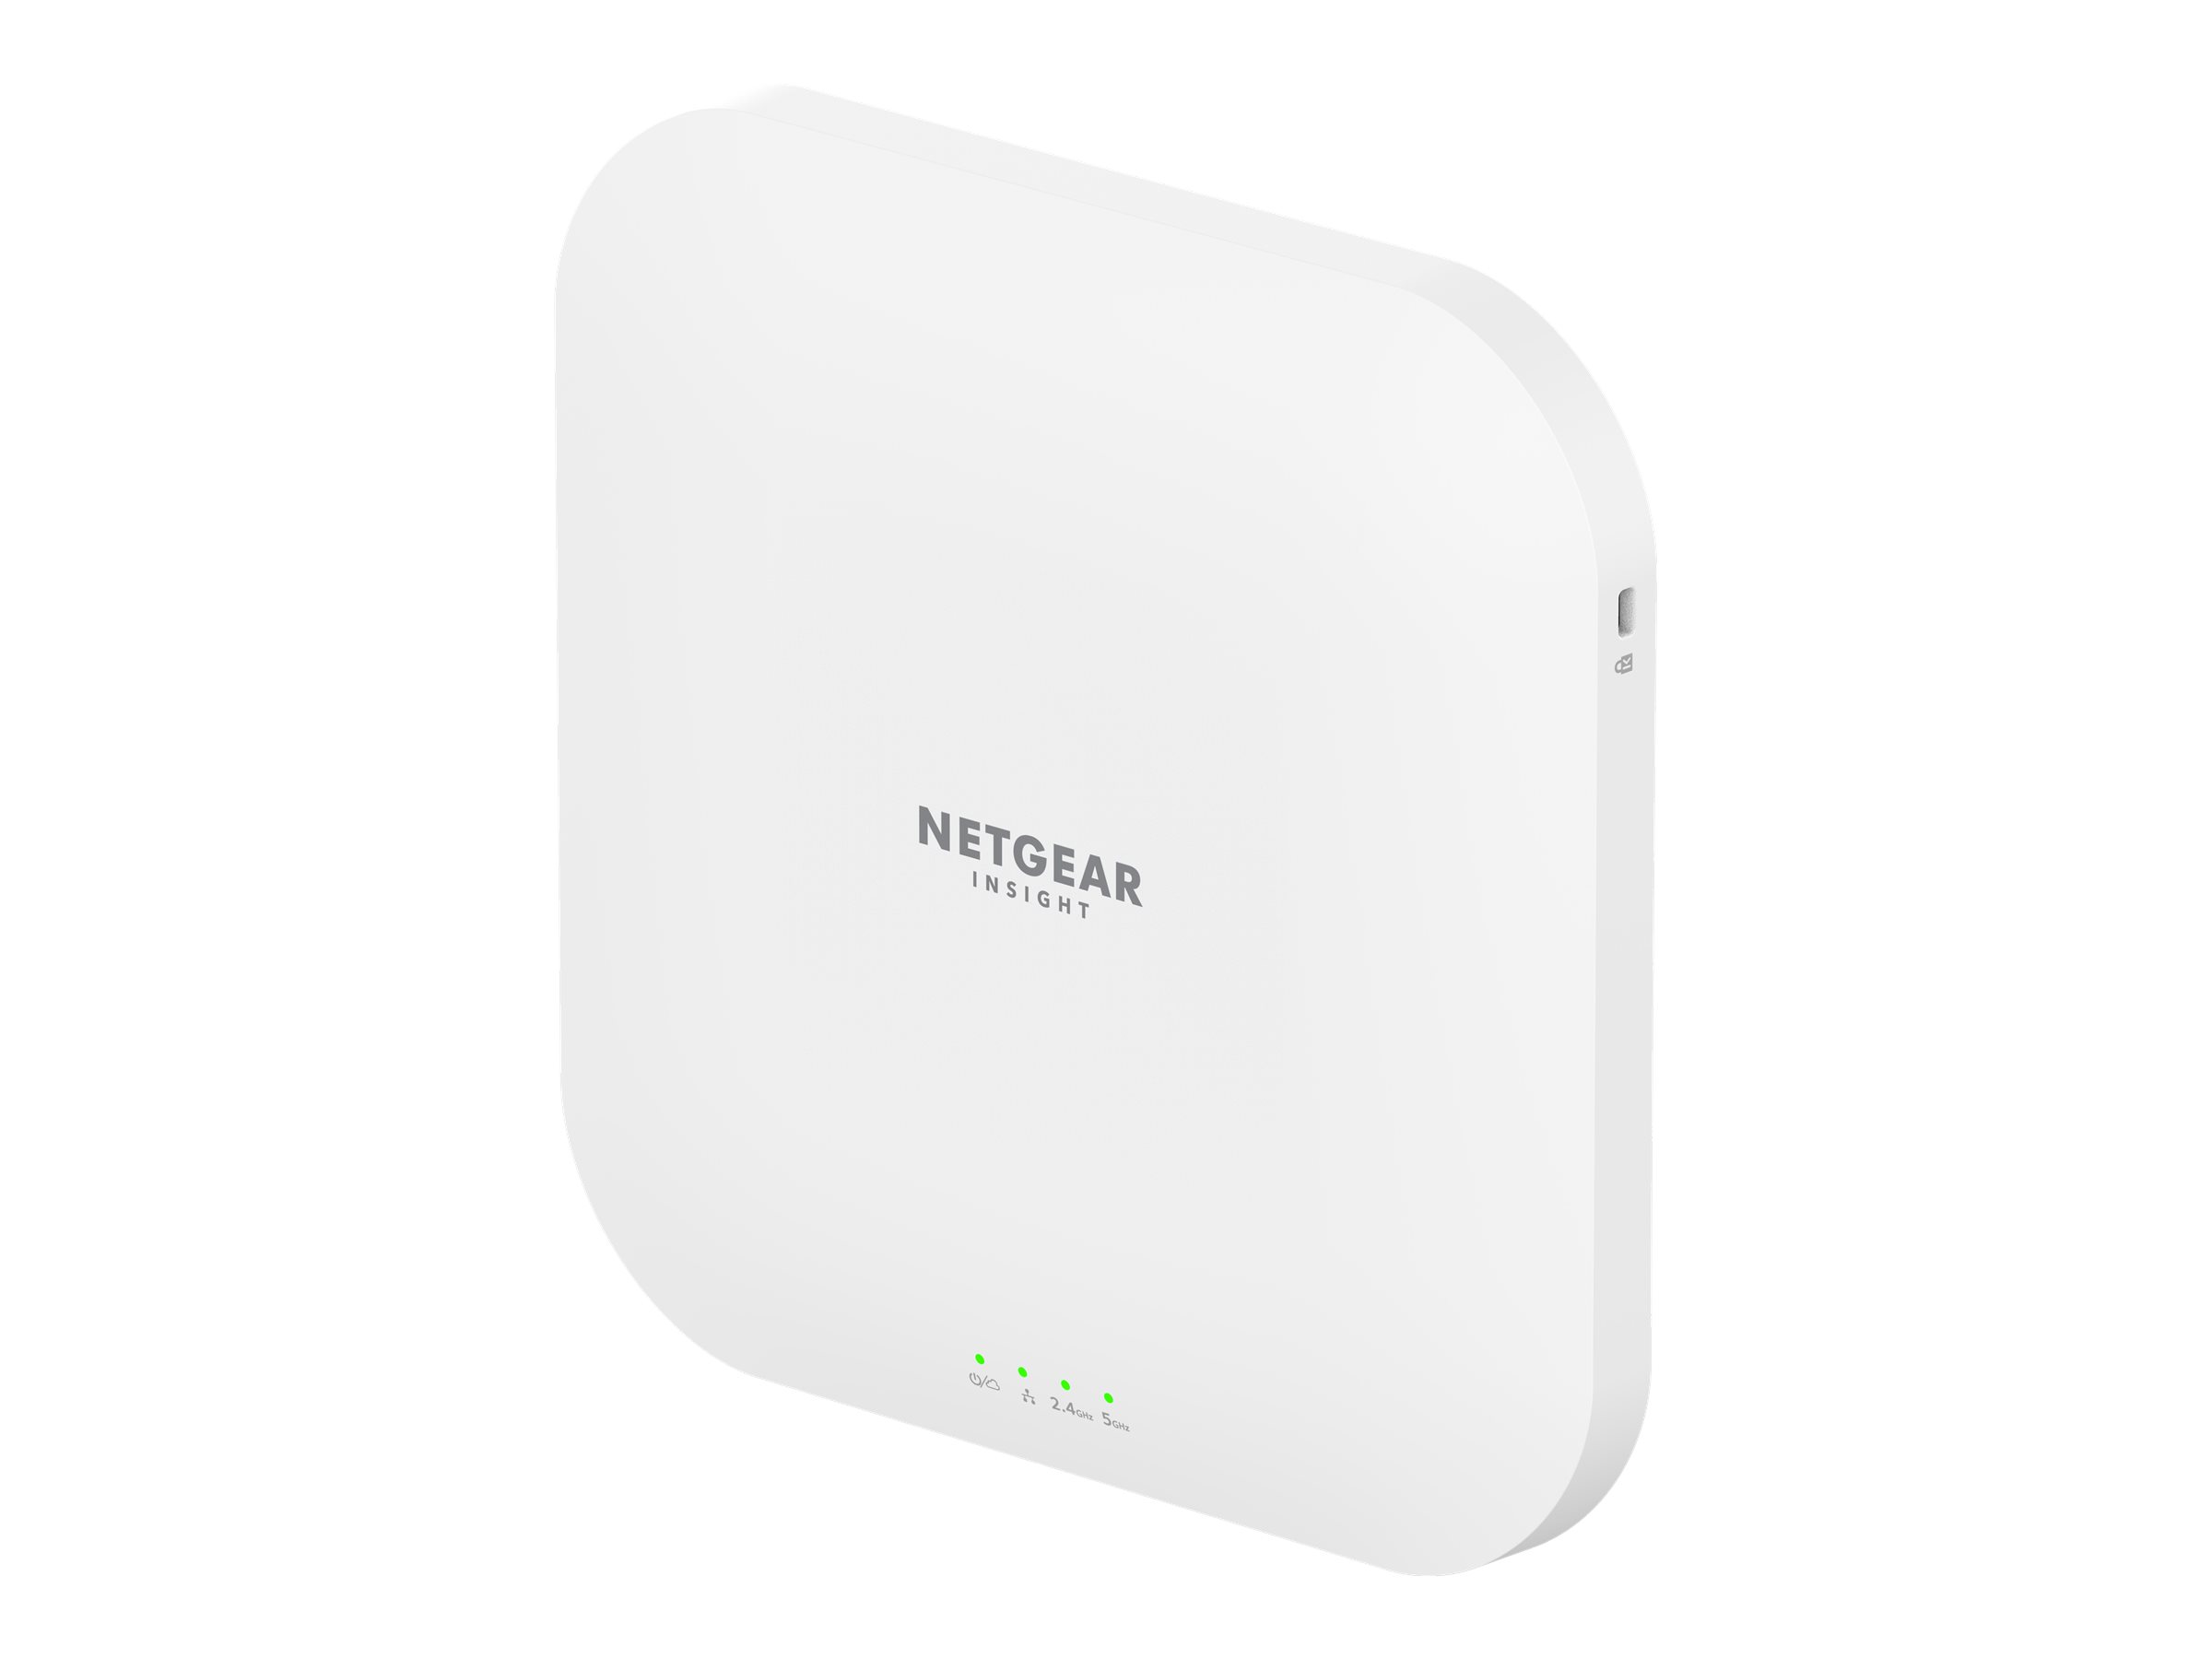 NETGEAR Insight Managed WiFi 6 AX3600 Dual Band Multi-Gig Access Point with Power Adapter